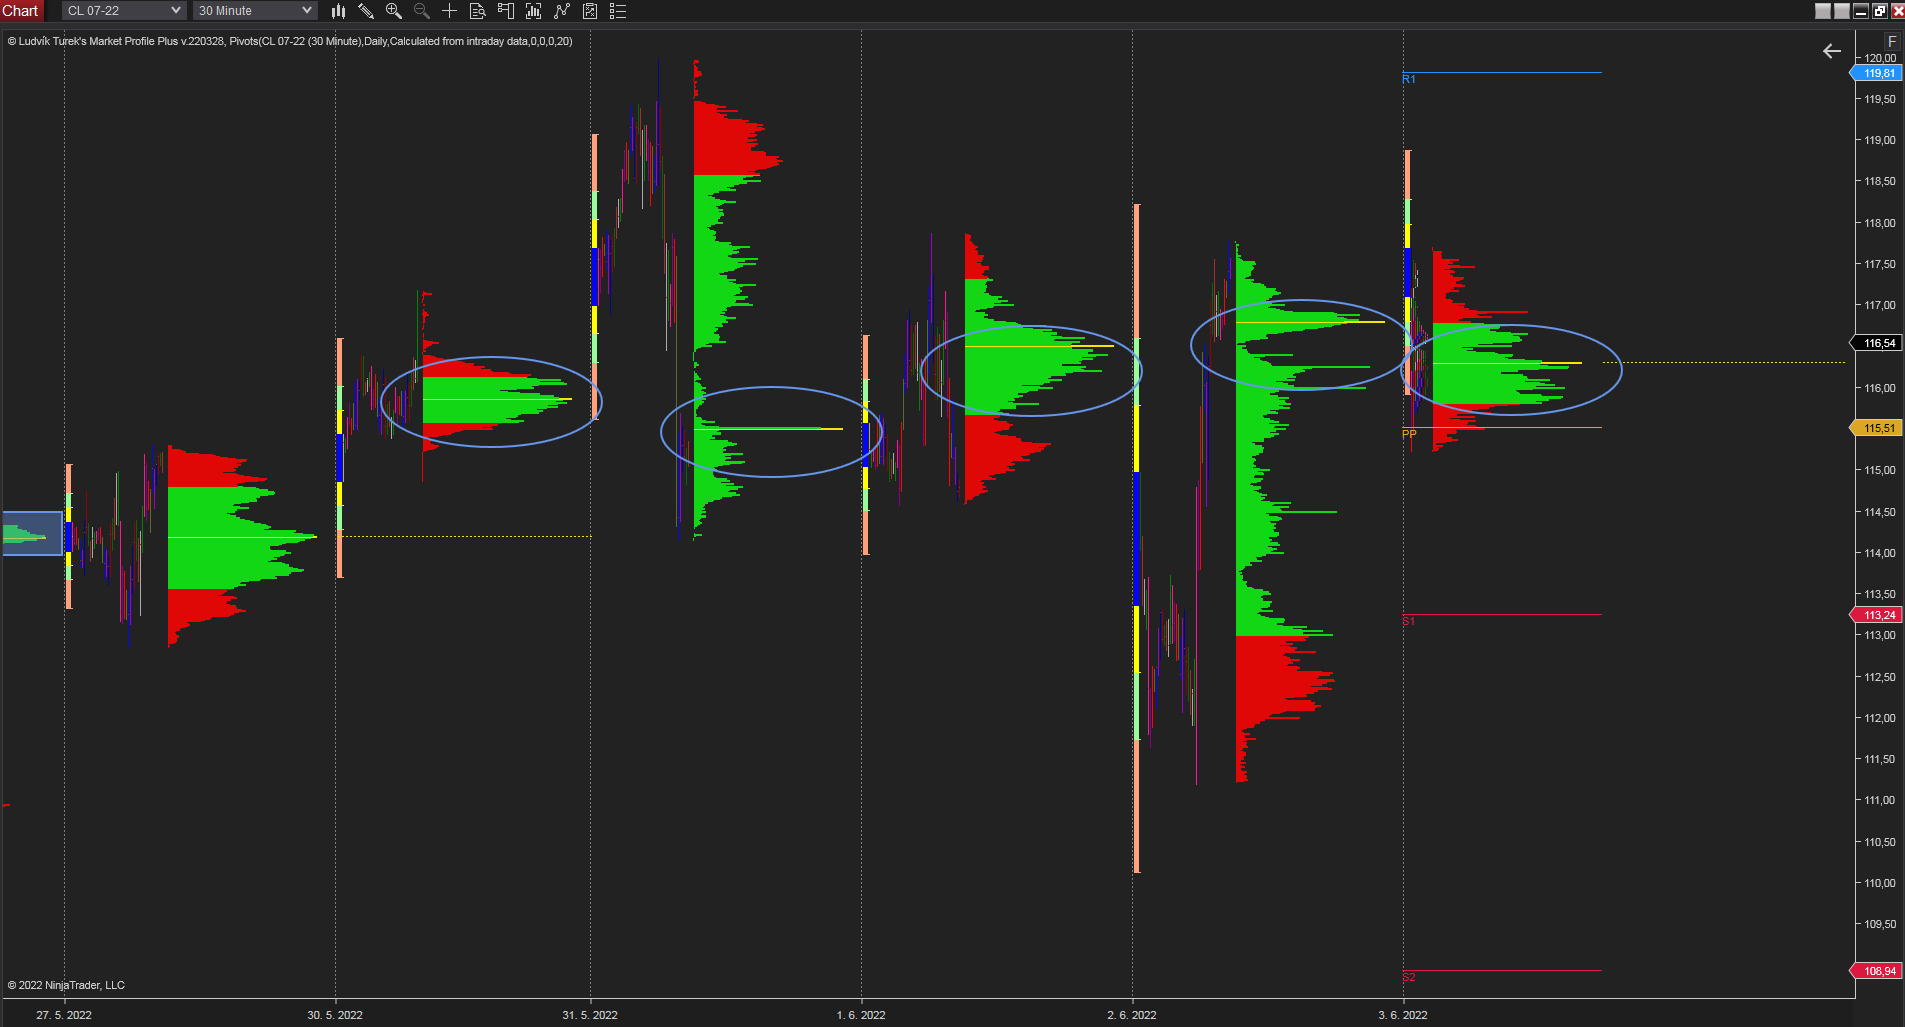 30 minutes chart of CL, Daily Market Profile. Source: Author's analysis